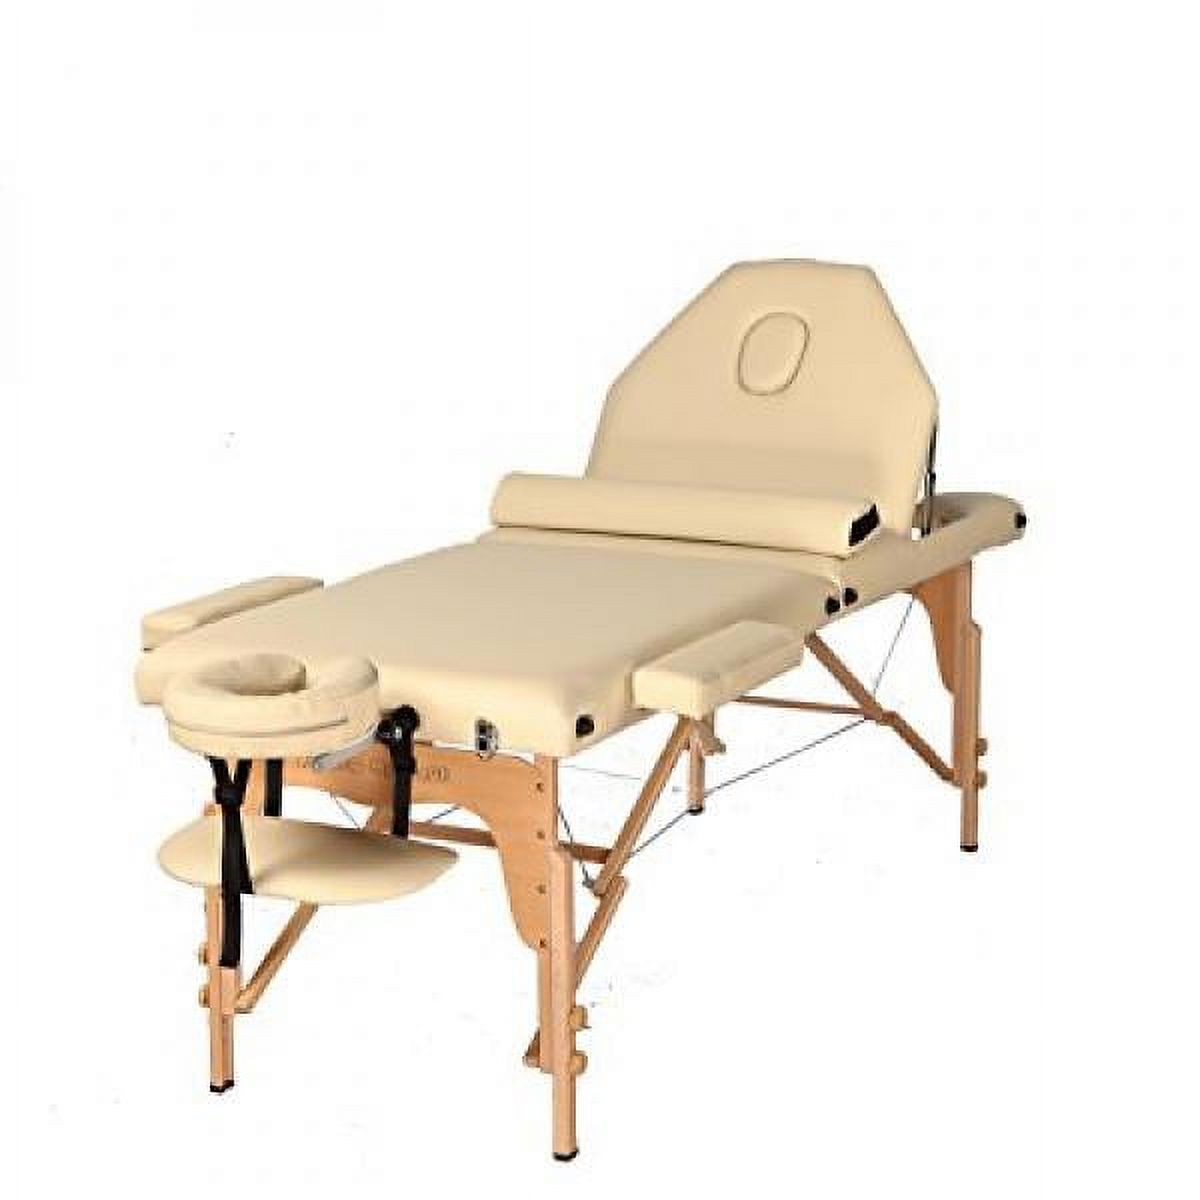 The Best Massage Table 3 Fold Cream Reiki Portable Massage Table Free Half Bolster and Carry Case- PU Leather High Quality - image 1 of 5